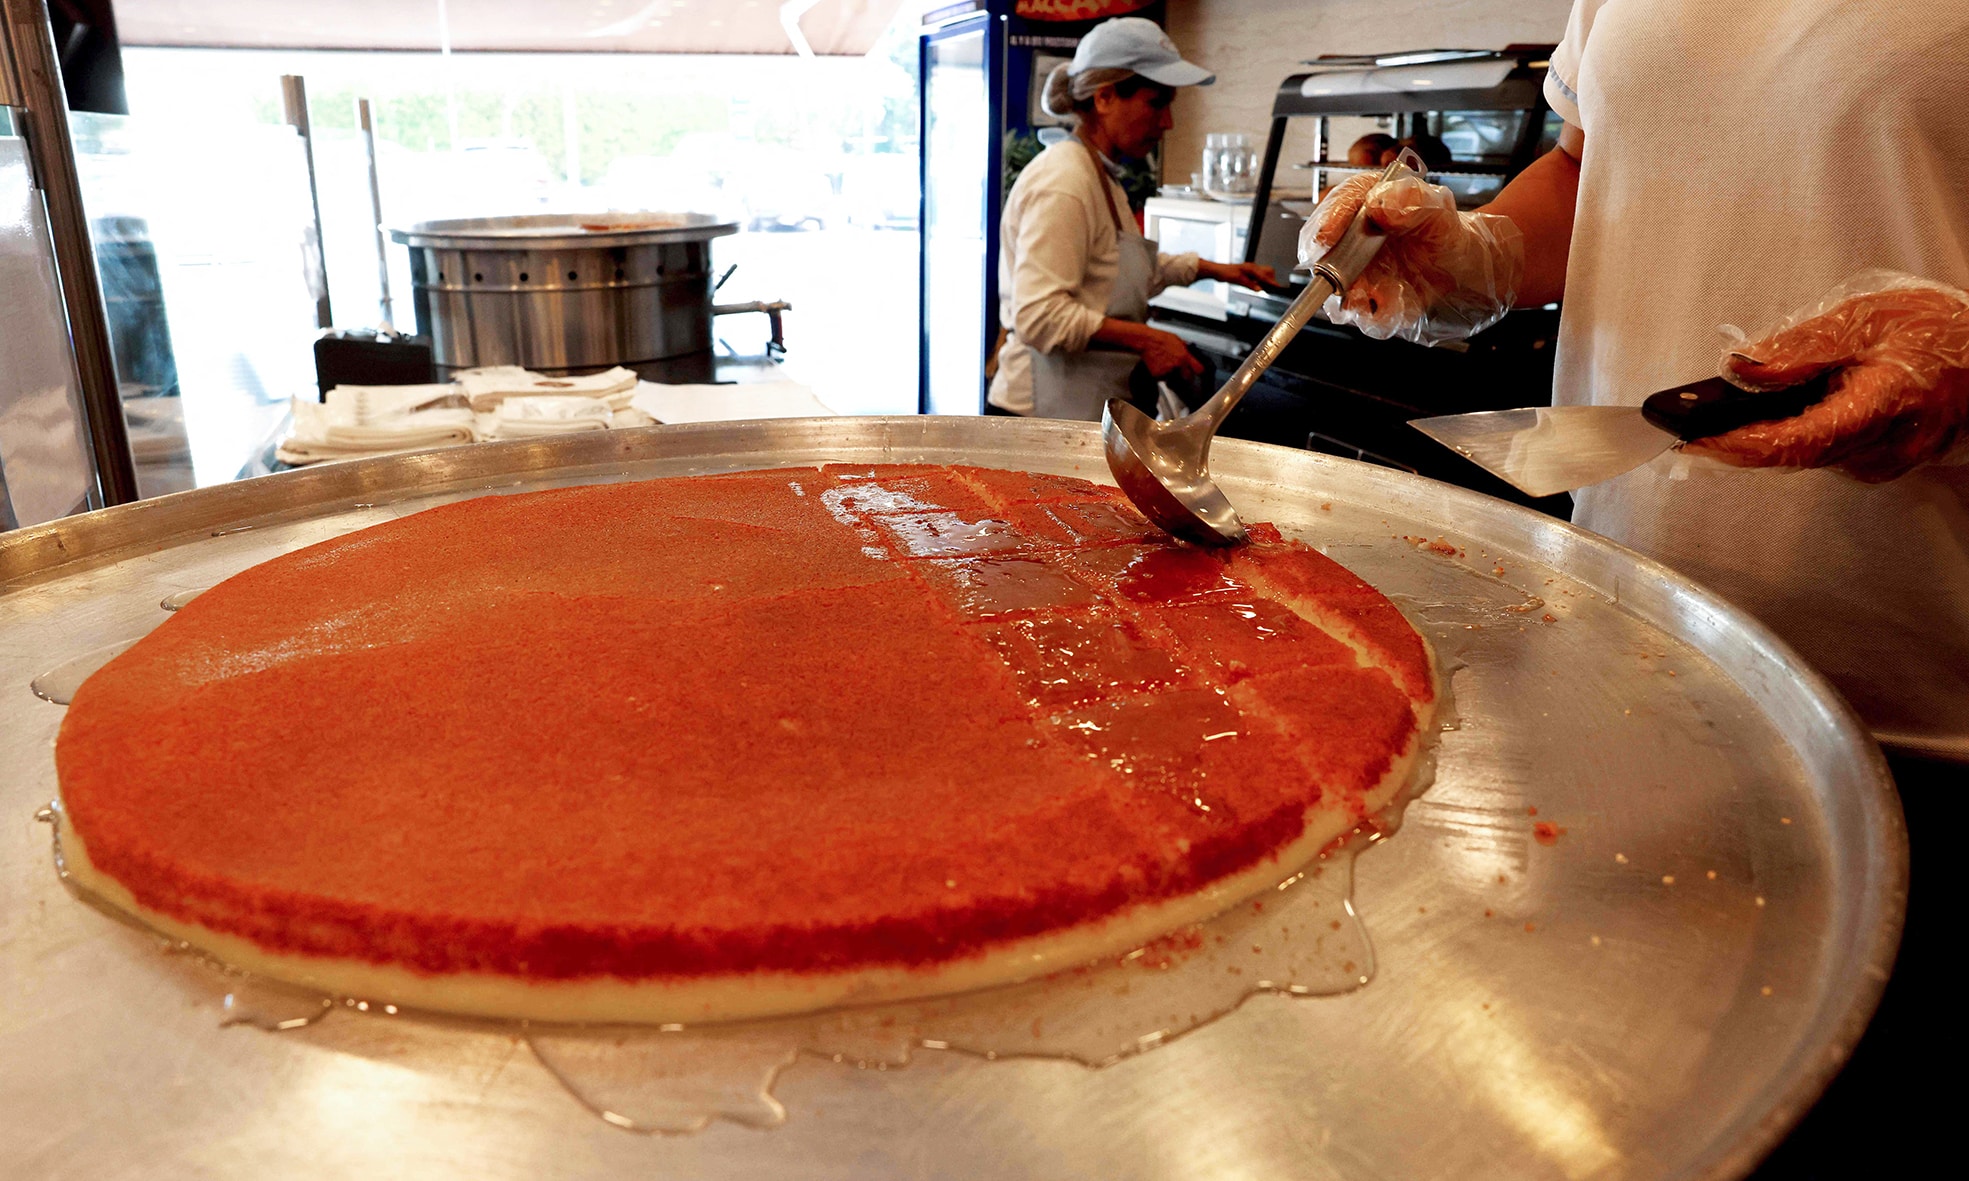 A workers pours syrup on a tray of traditional dessert Kunafa, at a shop in Byblos.